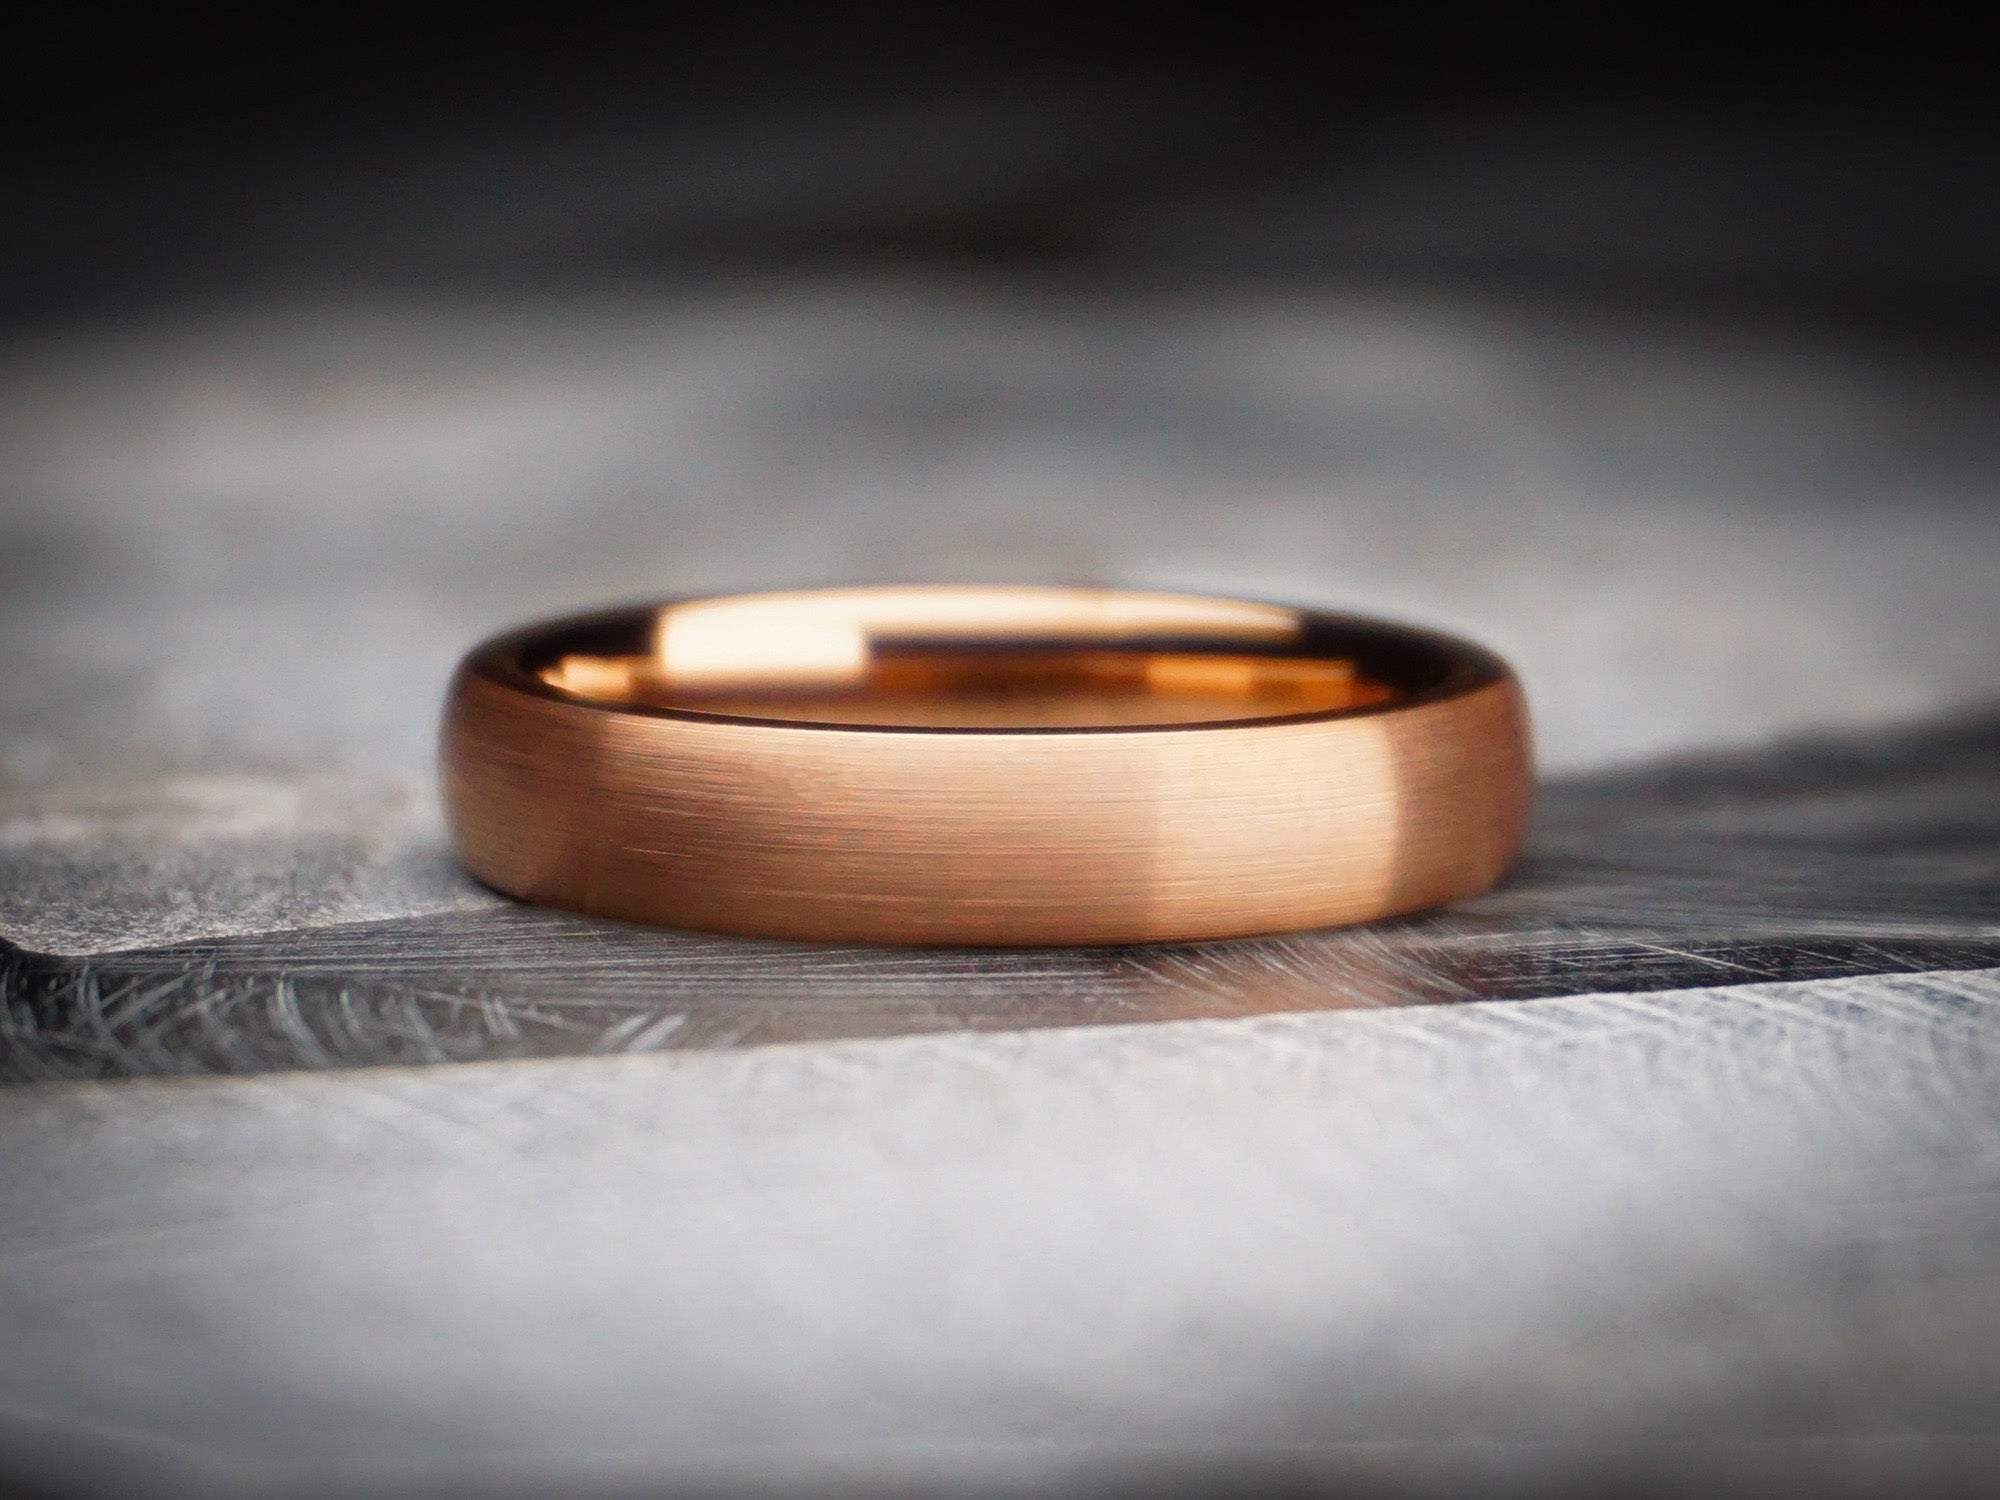 rose gold brushed tungsten ring, matte rose gold color, 4mm width, unique womens wedding ring, dark stone